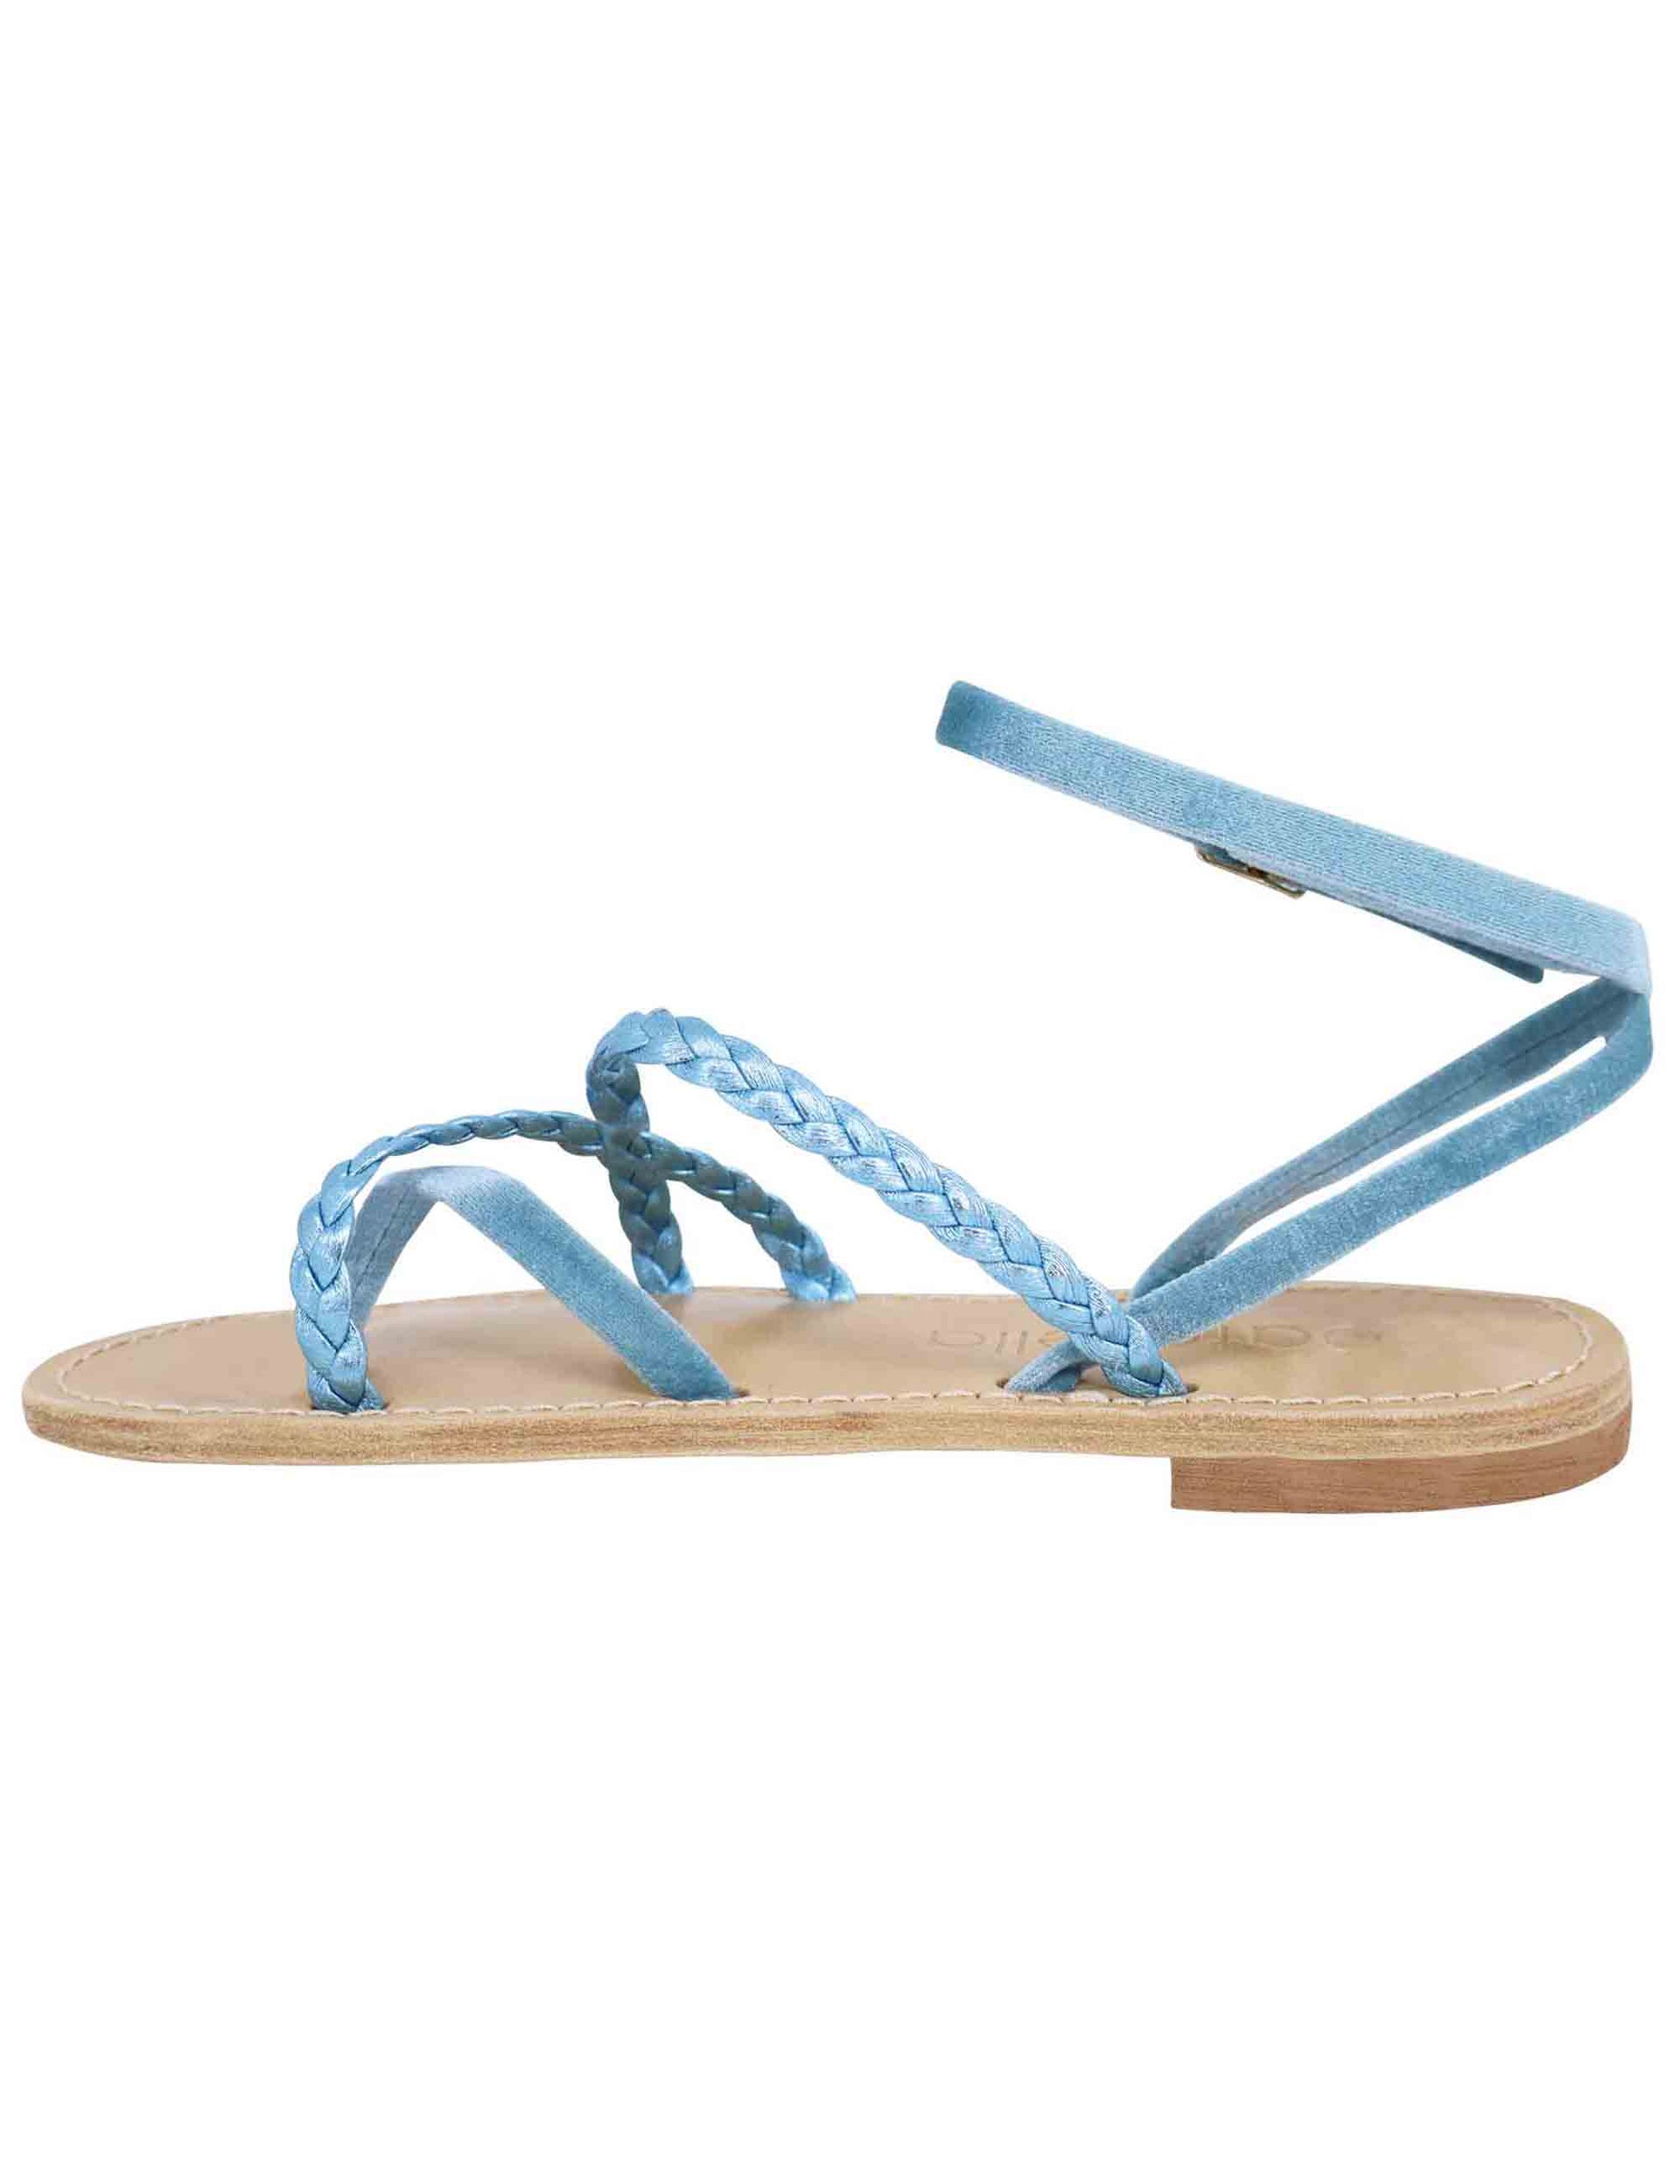 Women's flat sandals in light blue laminated nappa leather and chenille with ankle strap